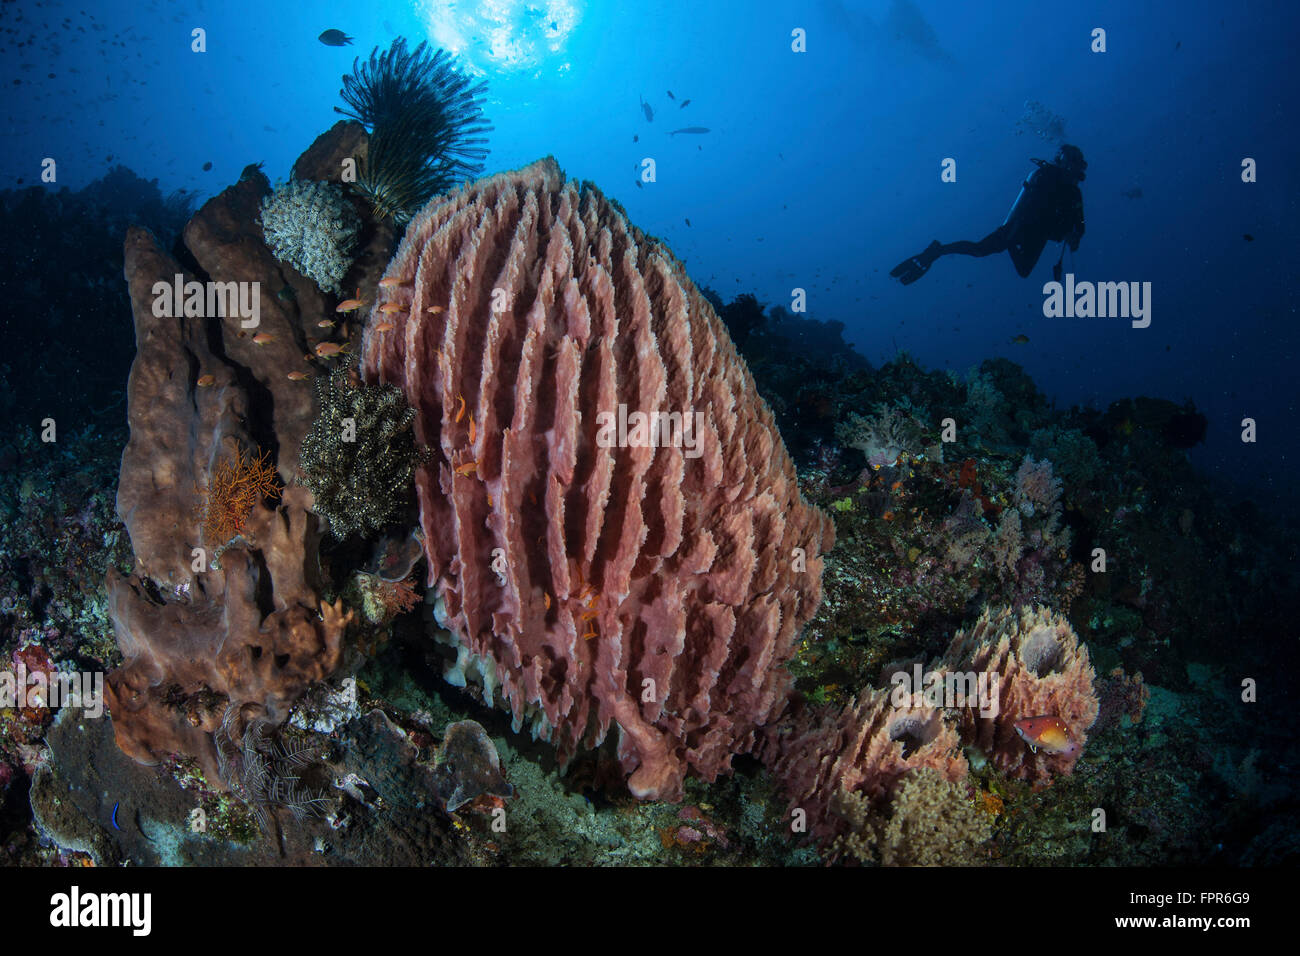 A scuba diver explores a reef in Komodo National Park where large barrel sponges grow. This tropical region in Indonesia is know Stock Photo